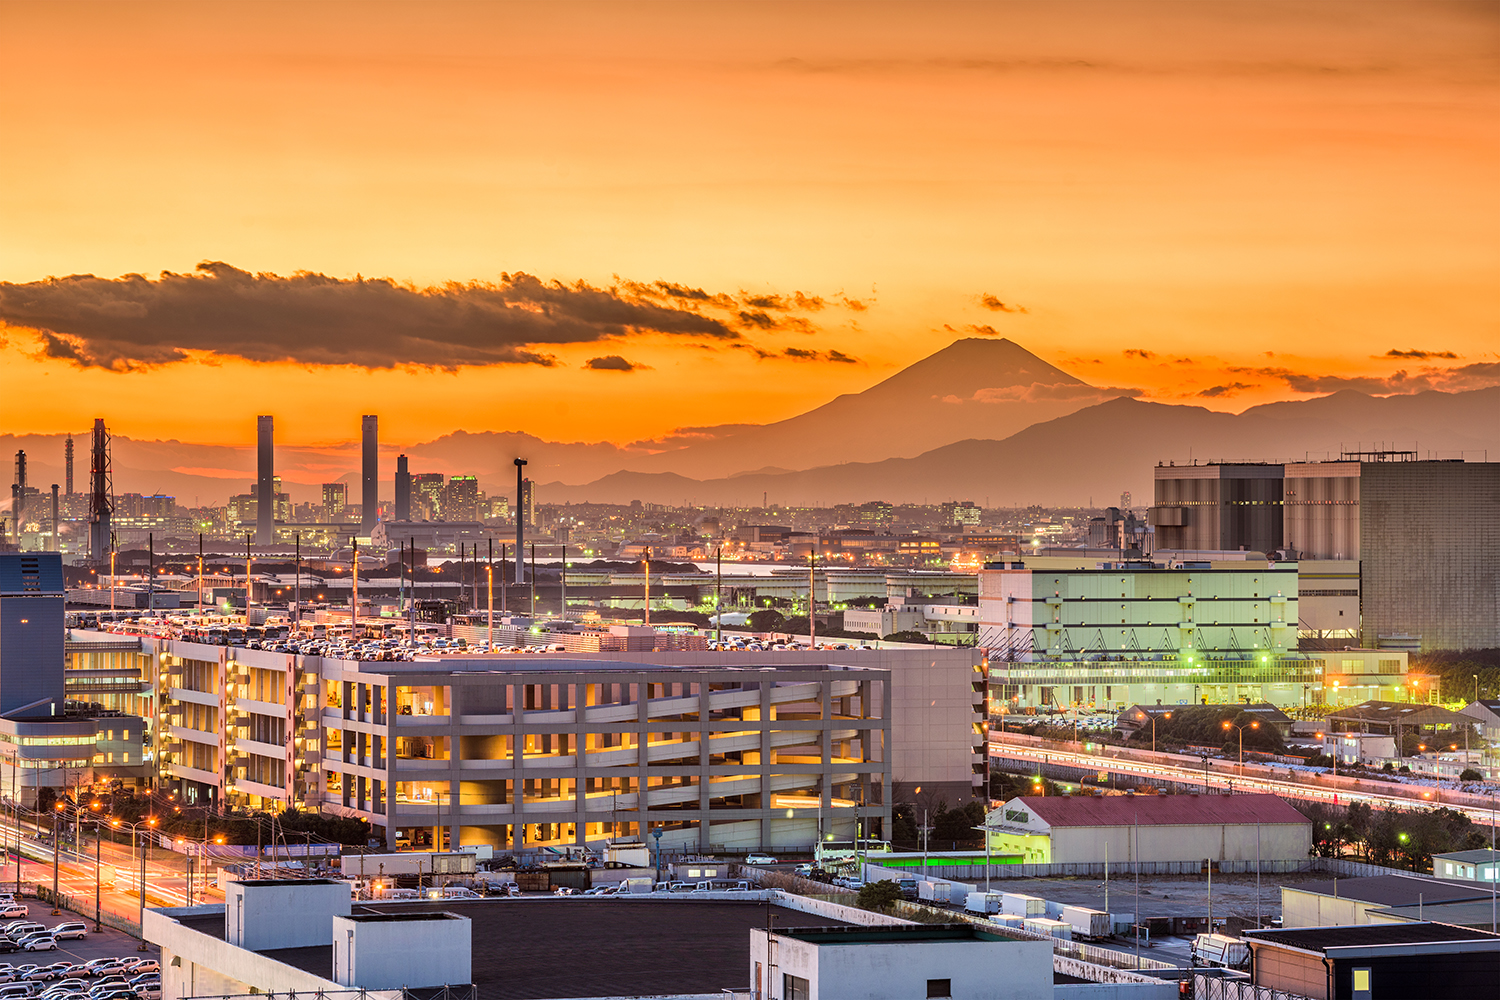 Japan in an orange sunset, mount fuji towers in the distance behind a factory district.